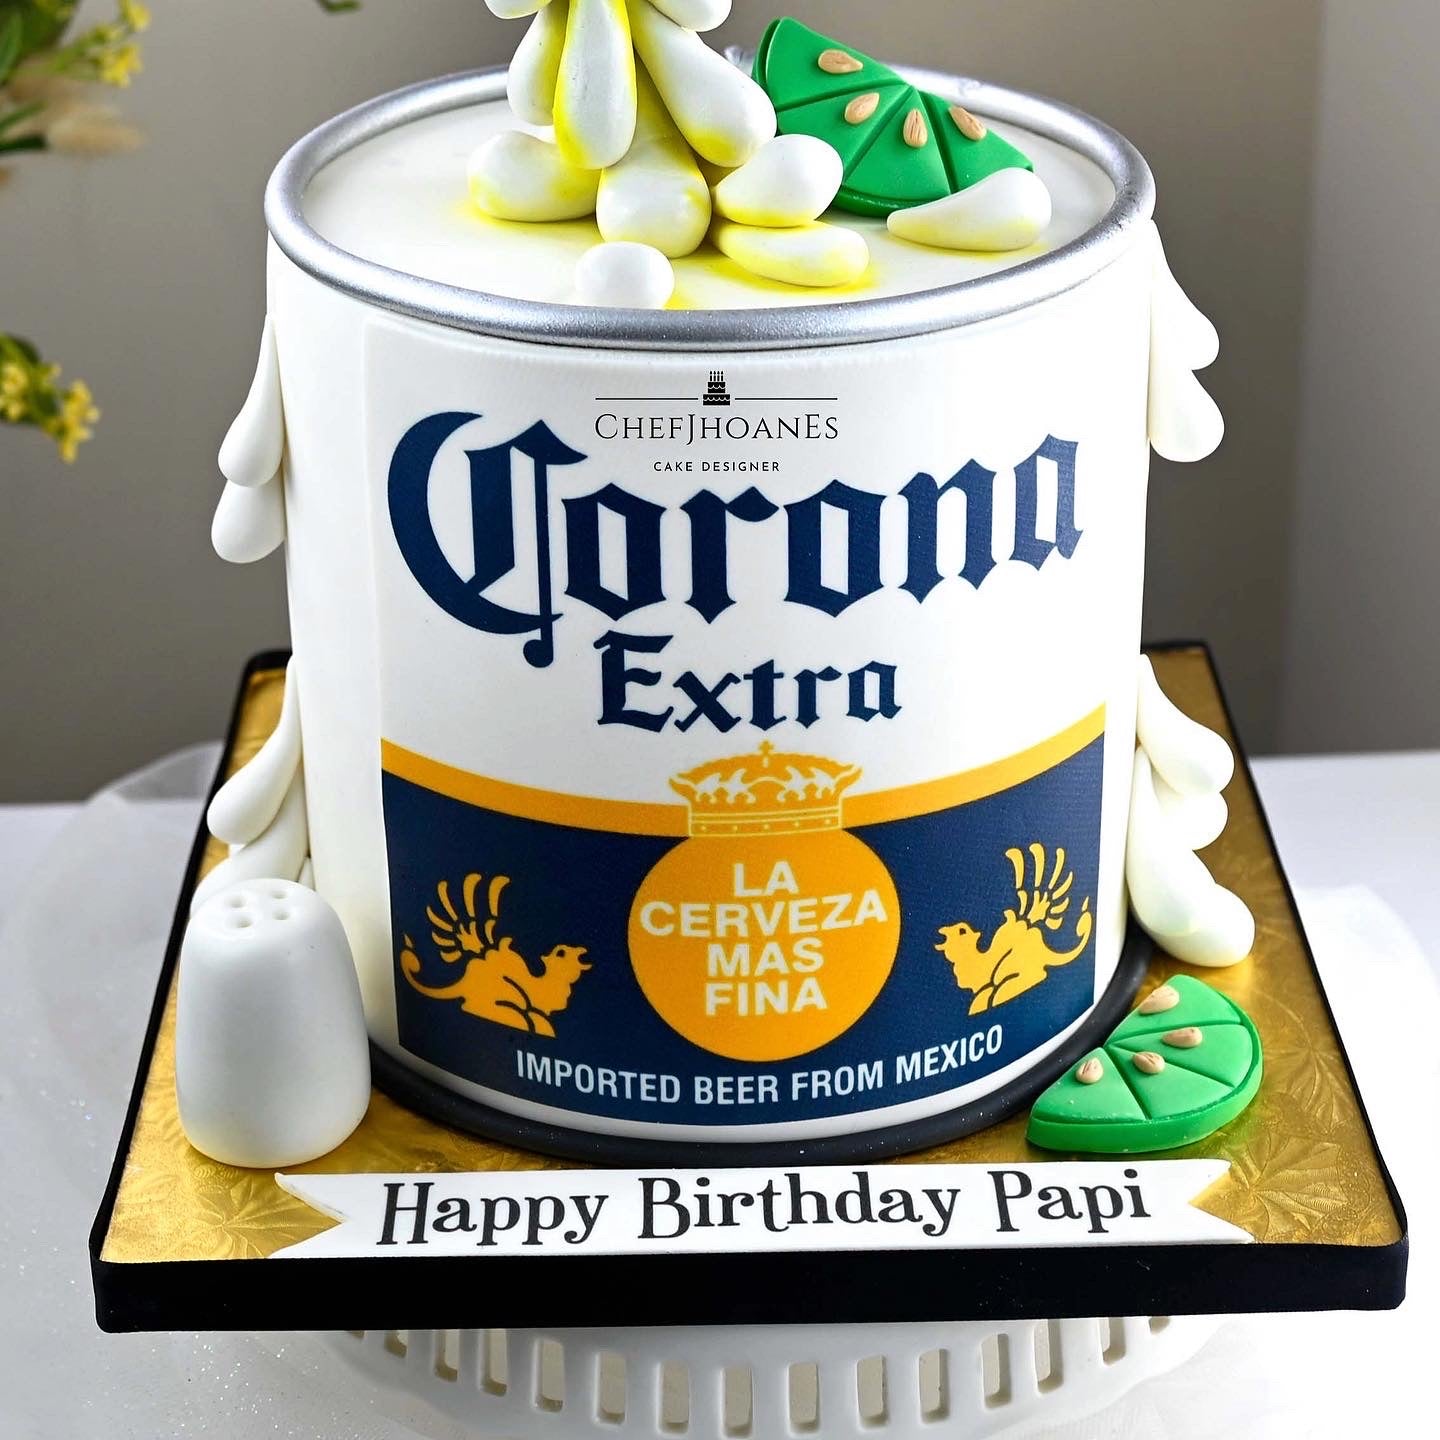 How to Make a Beer Cake